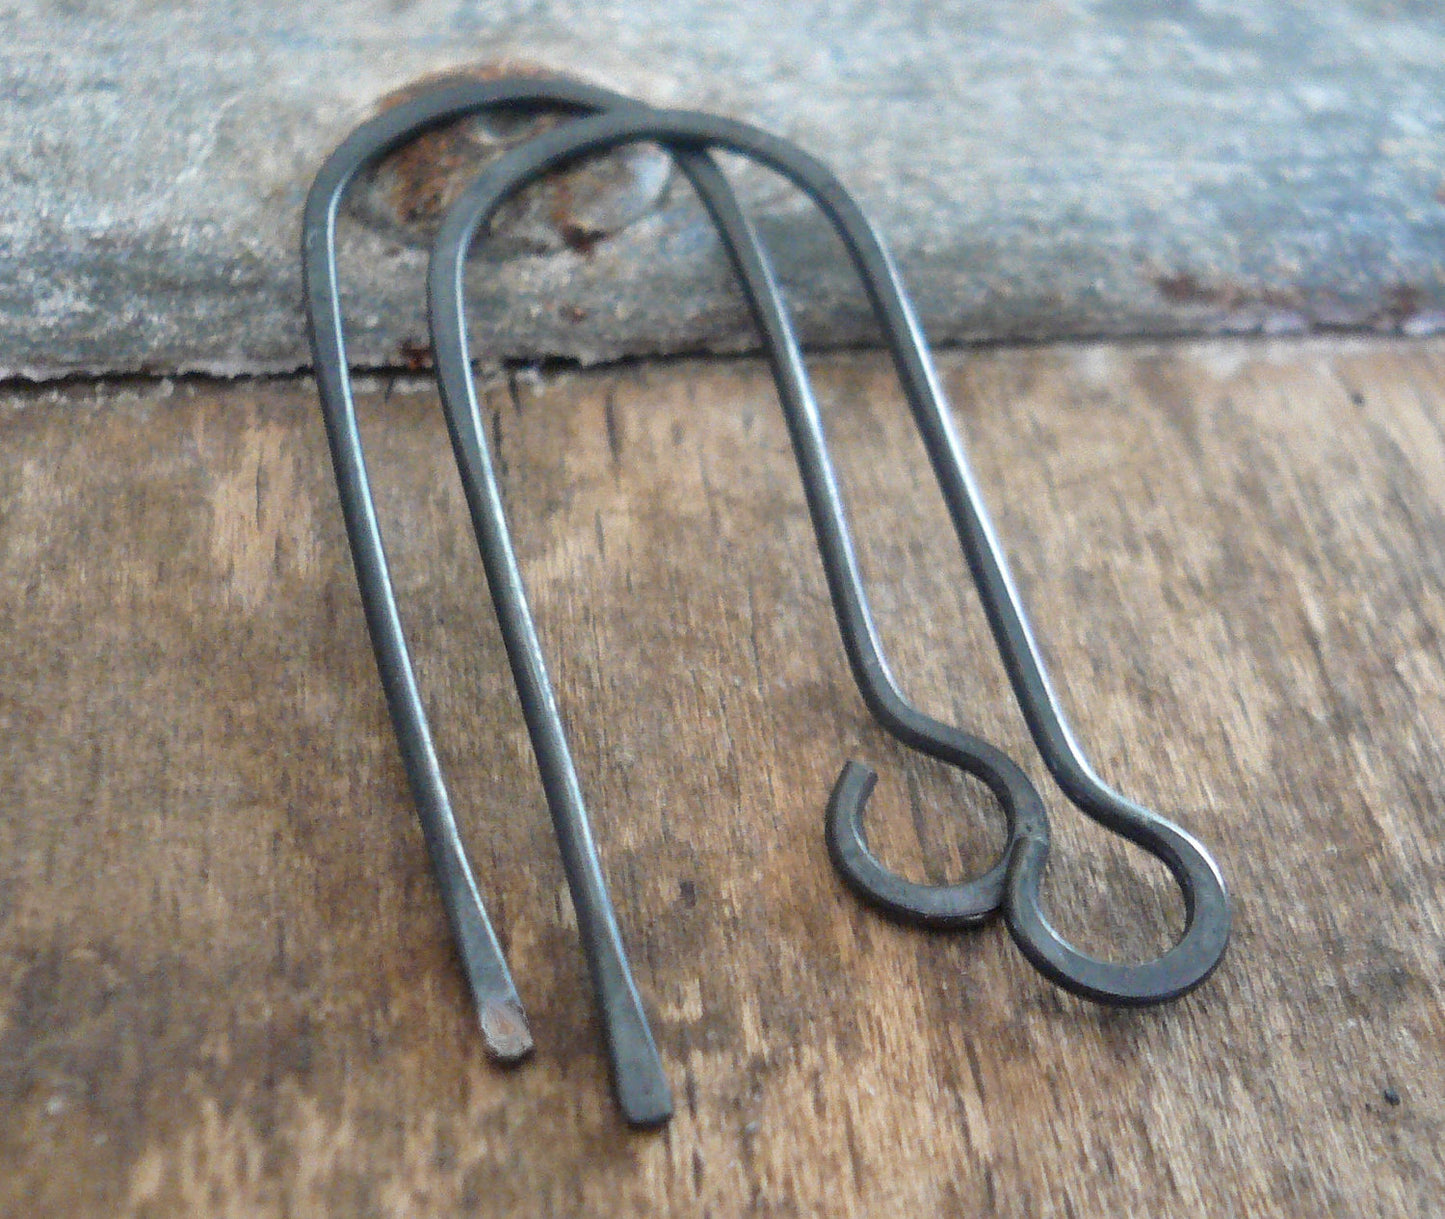 Minimalist Sterling Silver Earwires - Handmade. Handforged. Heavily Oxidized